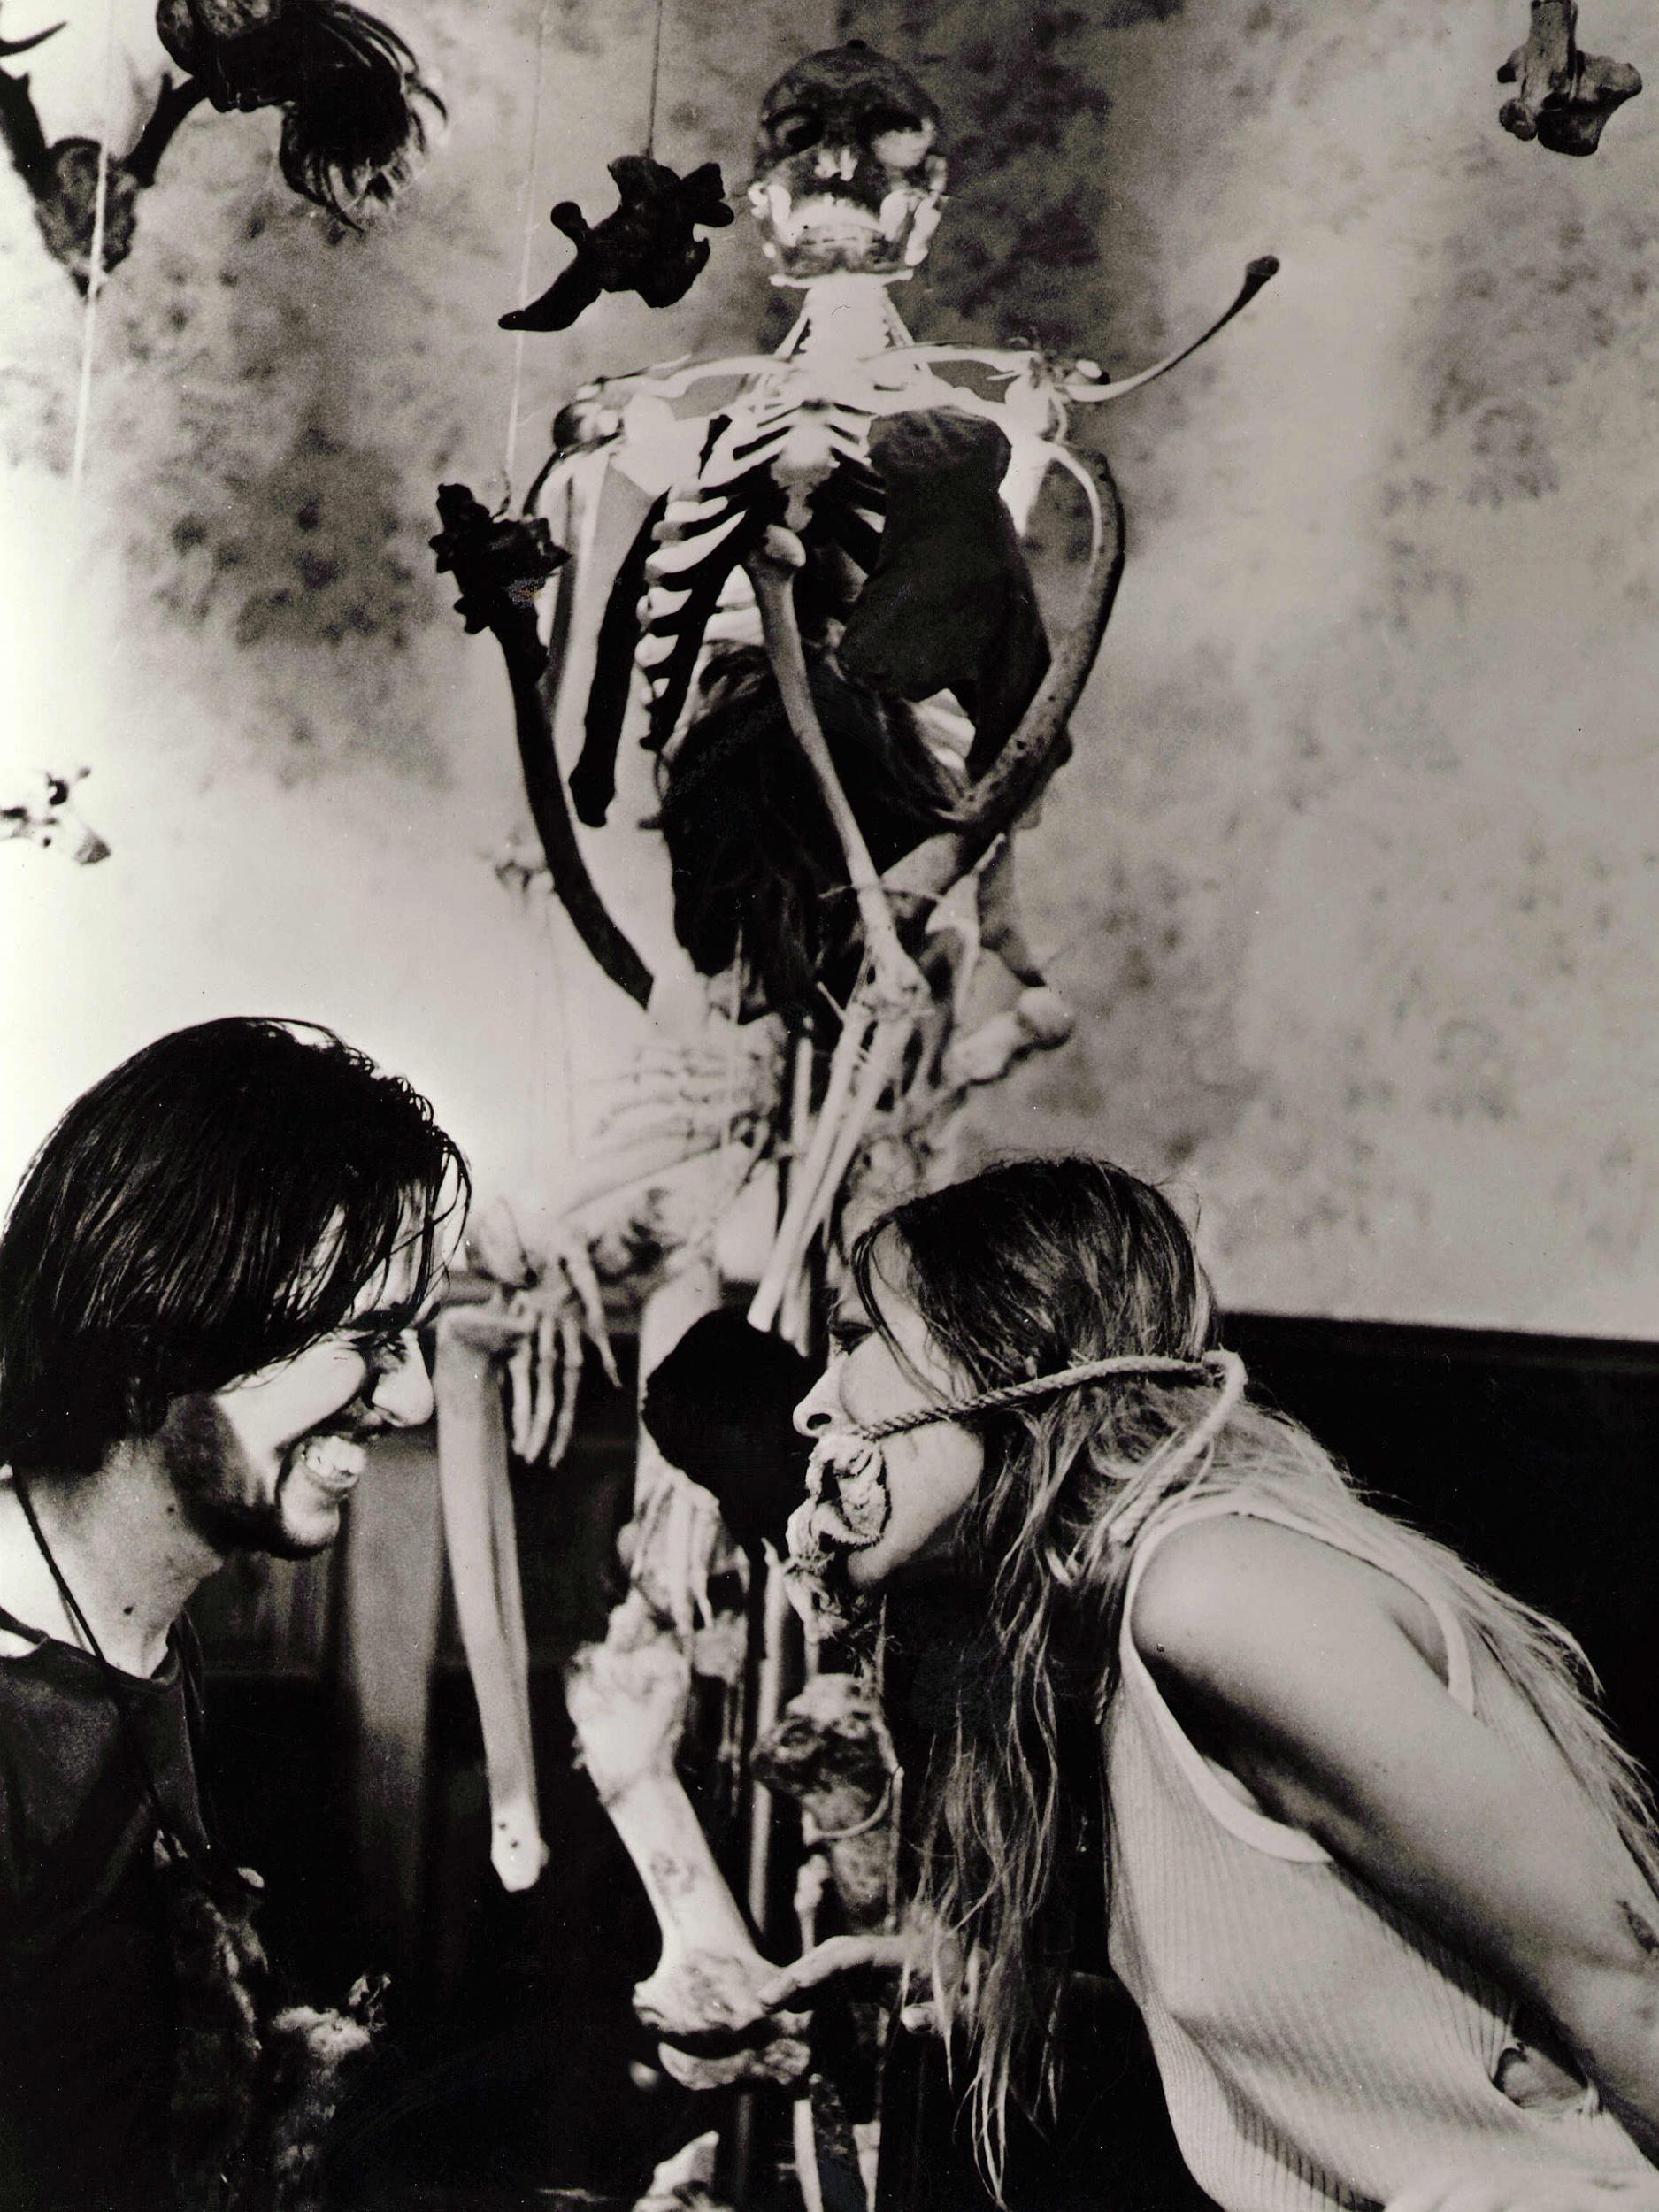 Edwin Neal as Hitchhiker and Marilyn Burns as Sally in ‘The Texas Chainsaw Massacre’